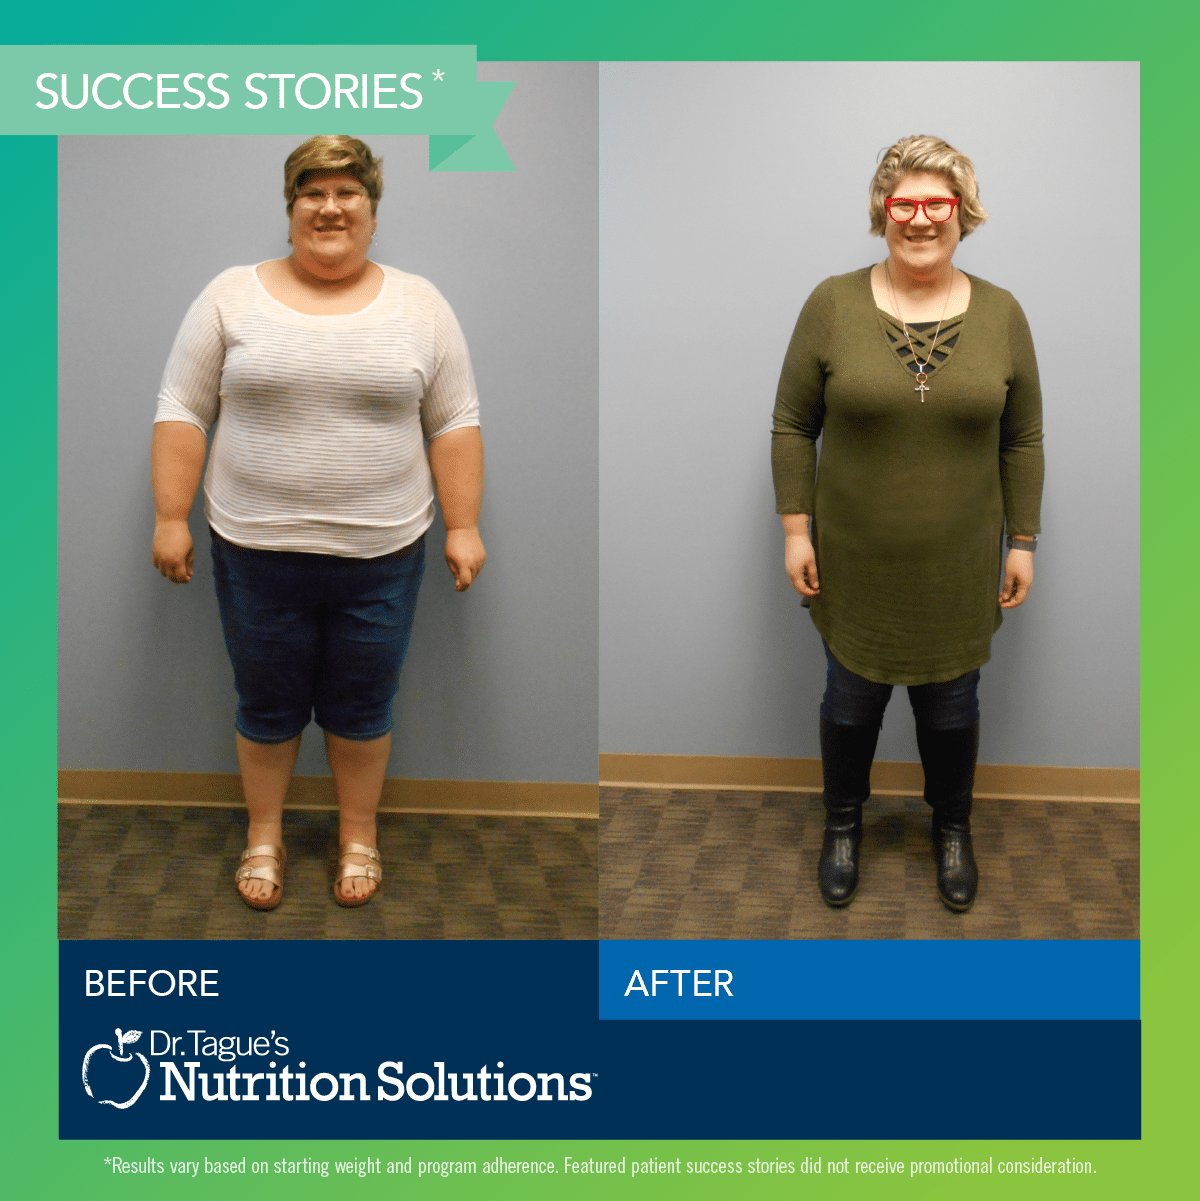 Dr. Tague's Center for Nutrition Success Stories - Ryann lost 98lbs in 21 weeks